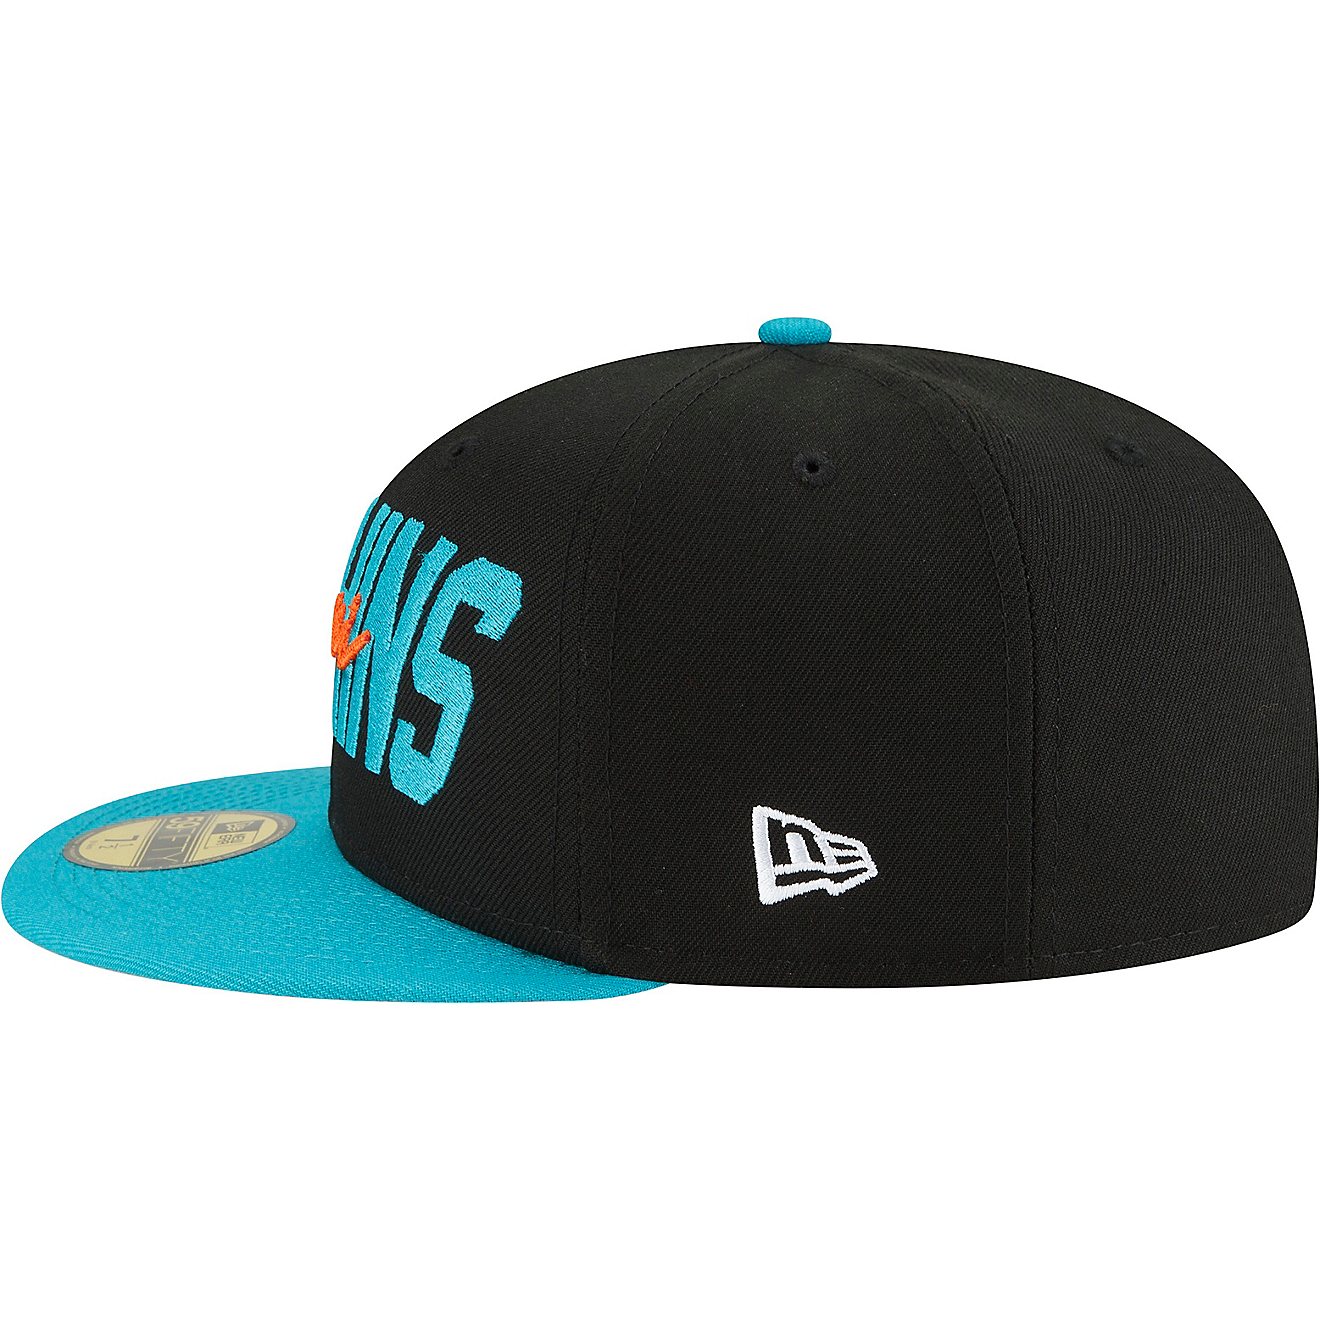 New Era Men's Miami Dolphins NFL Draft 22 59FIFTY Cap                                                                            - view number 5